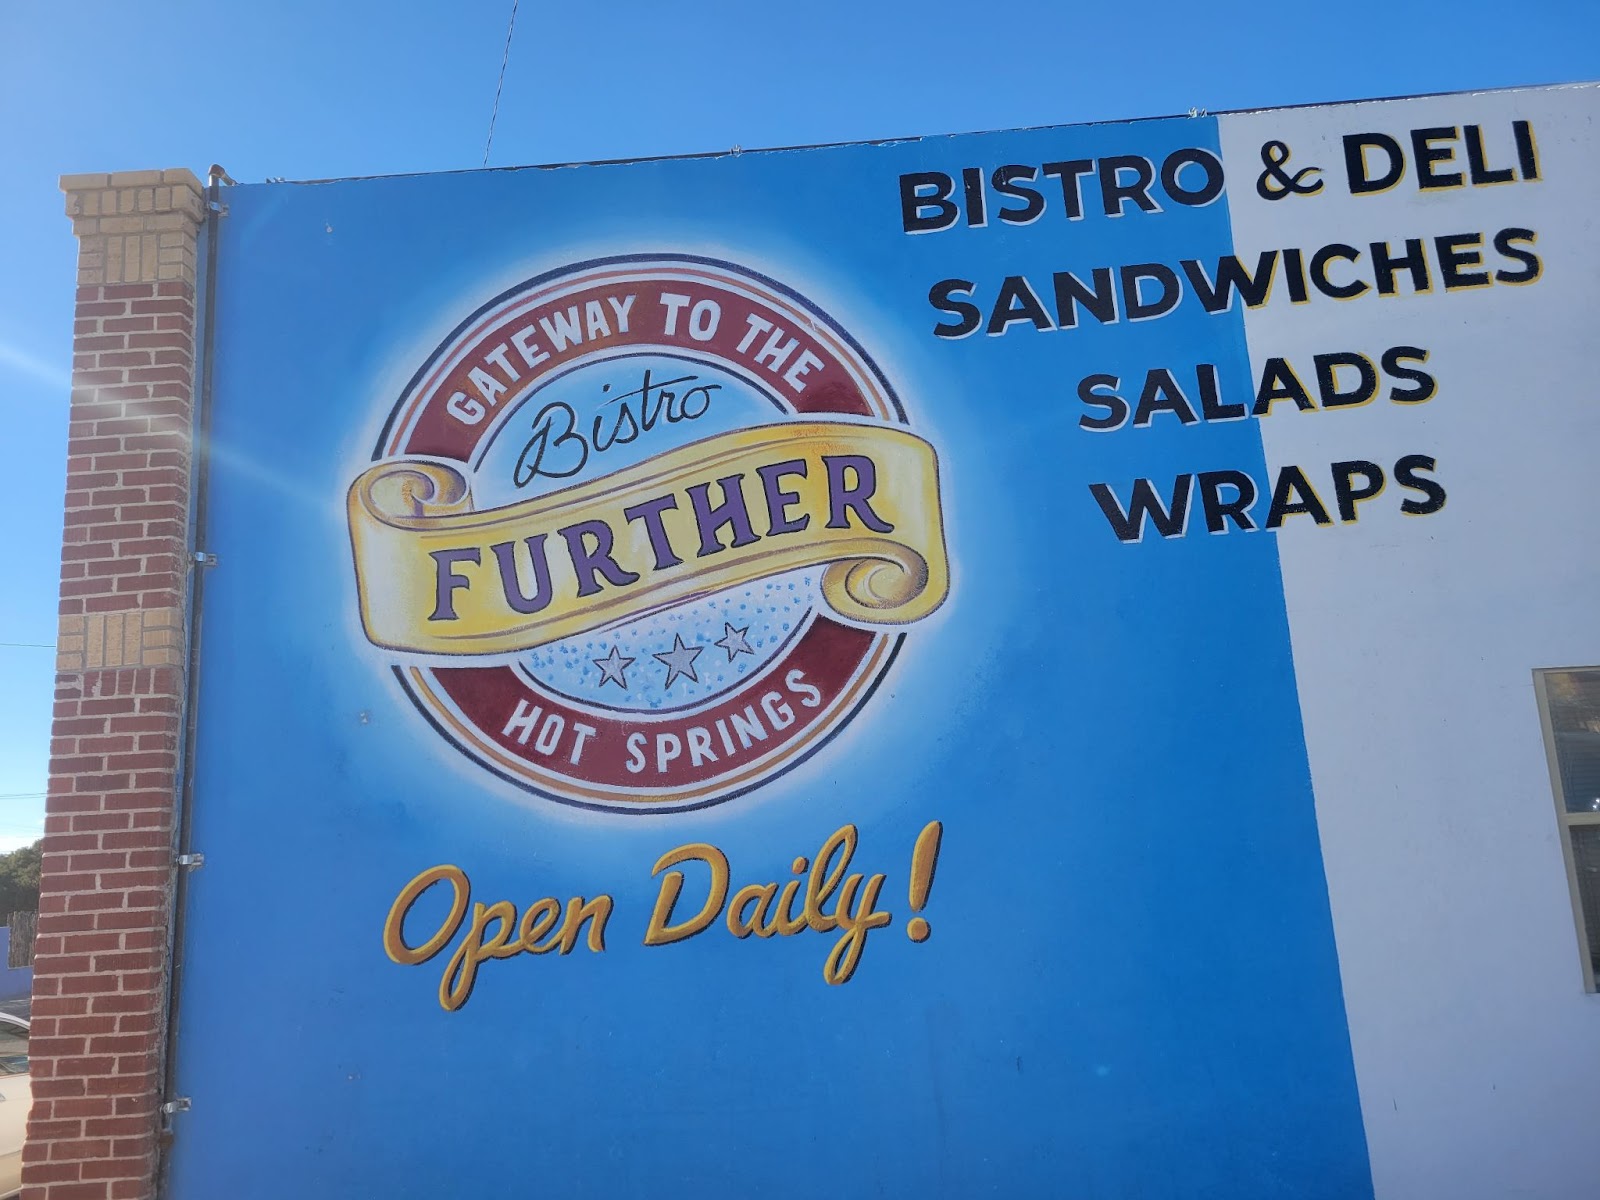 Further Bistro